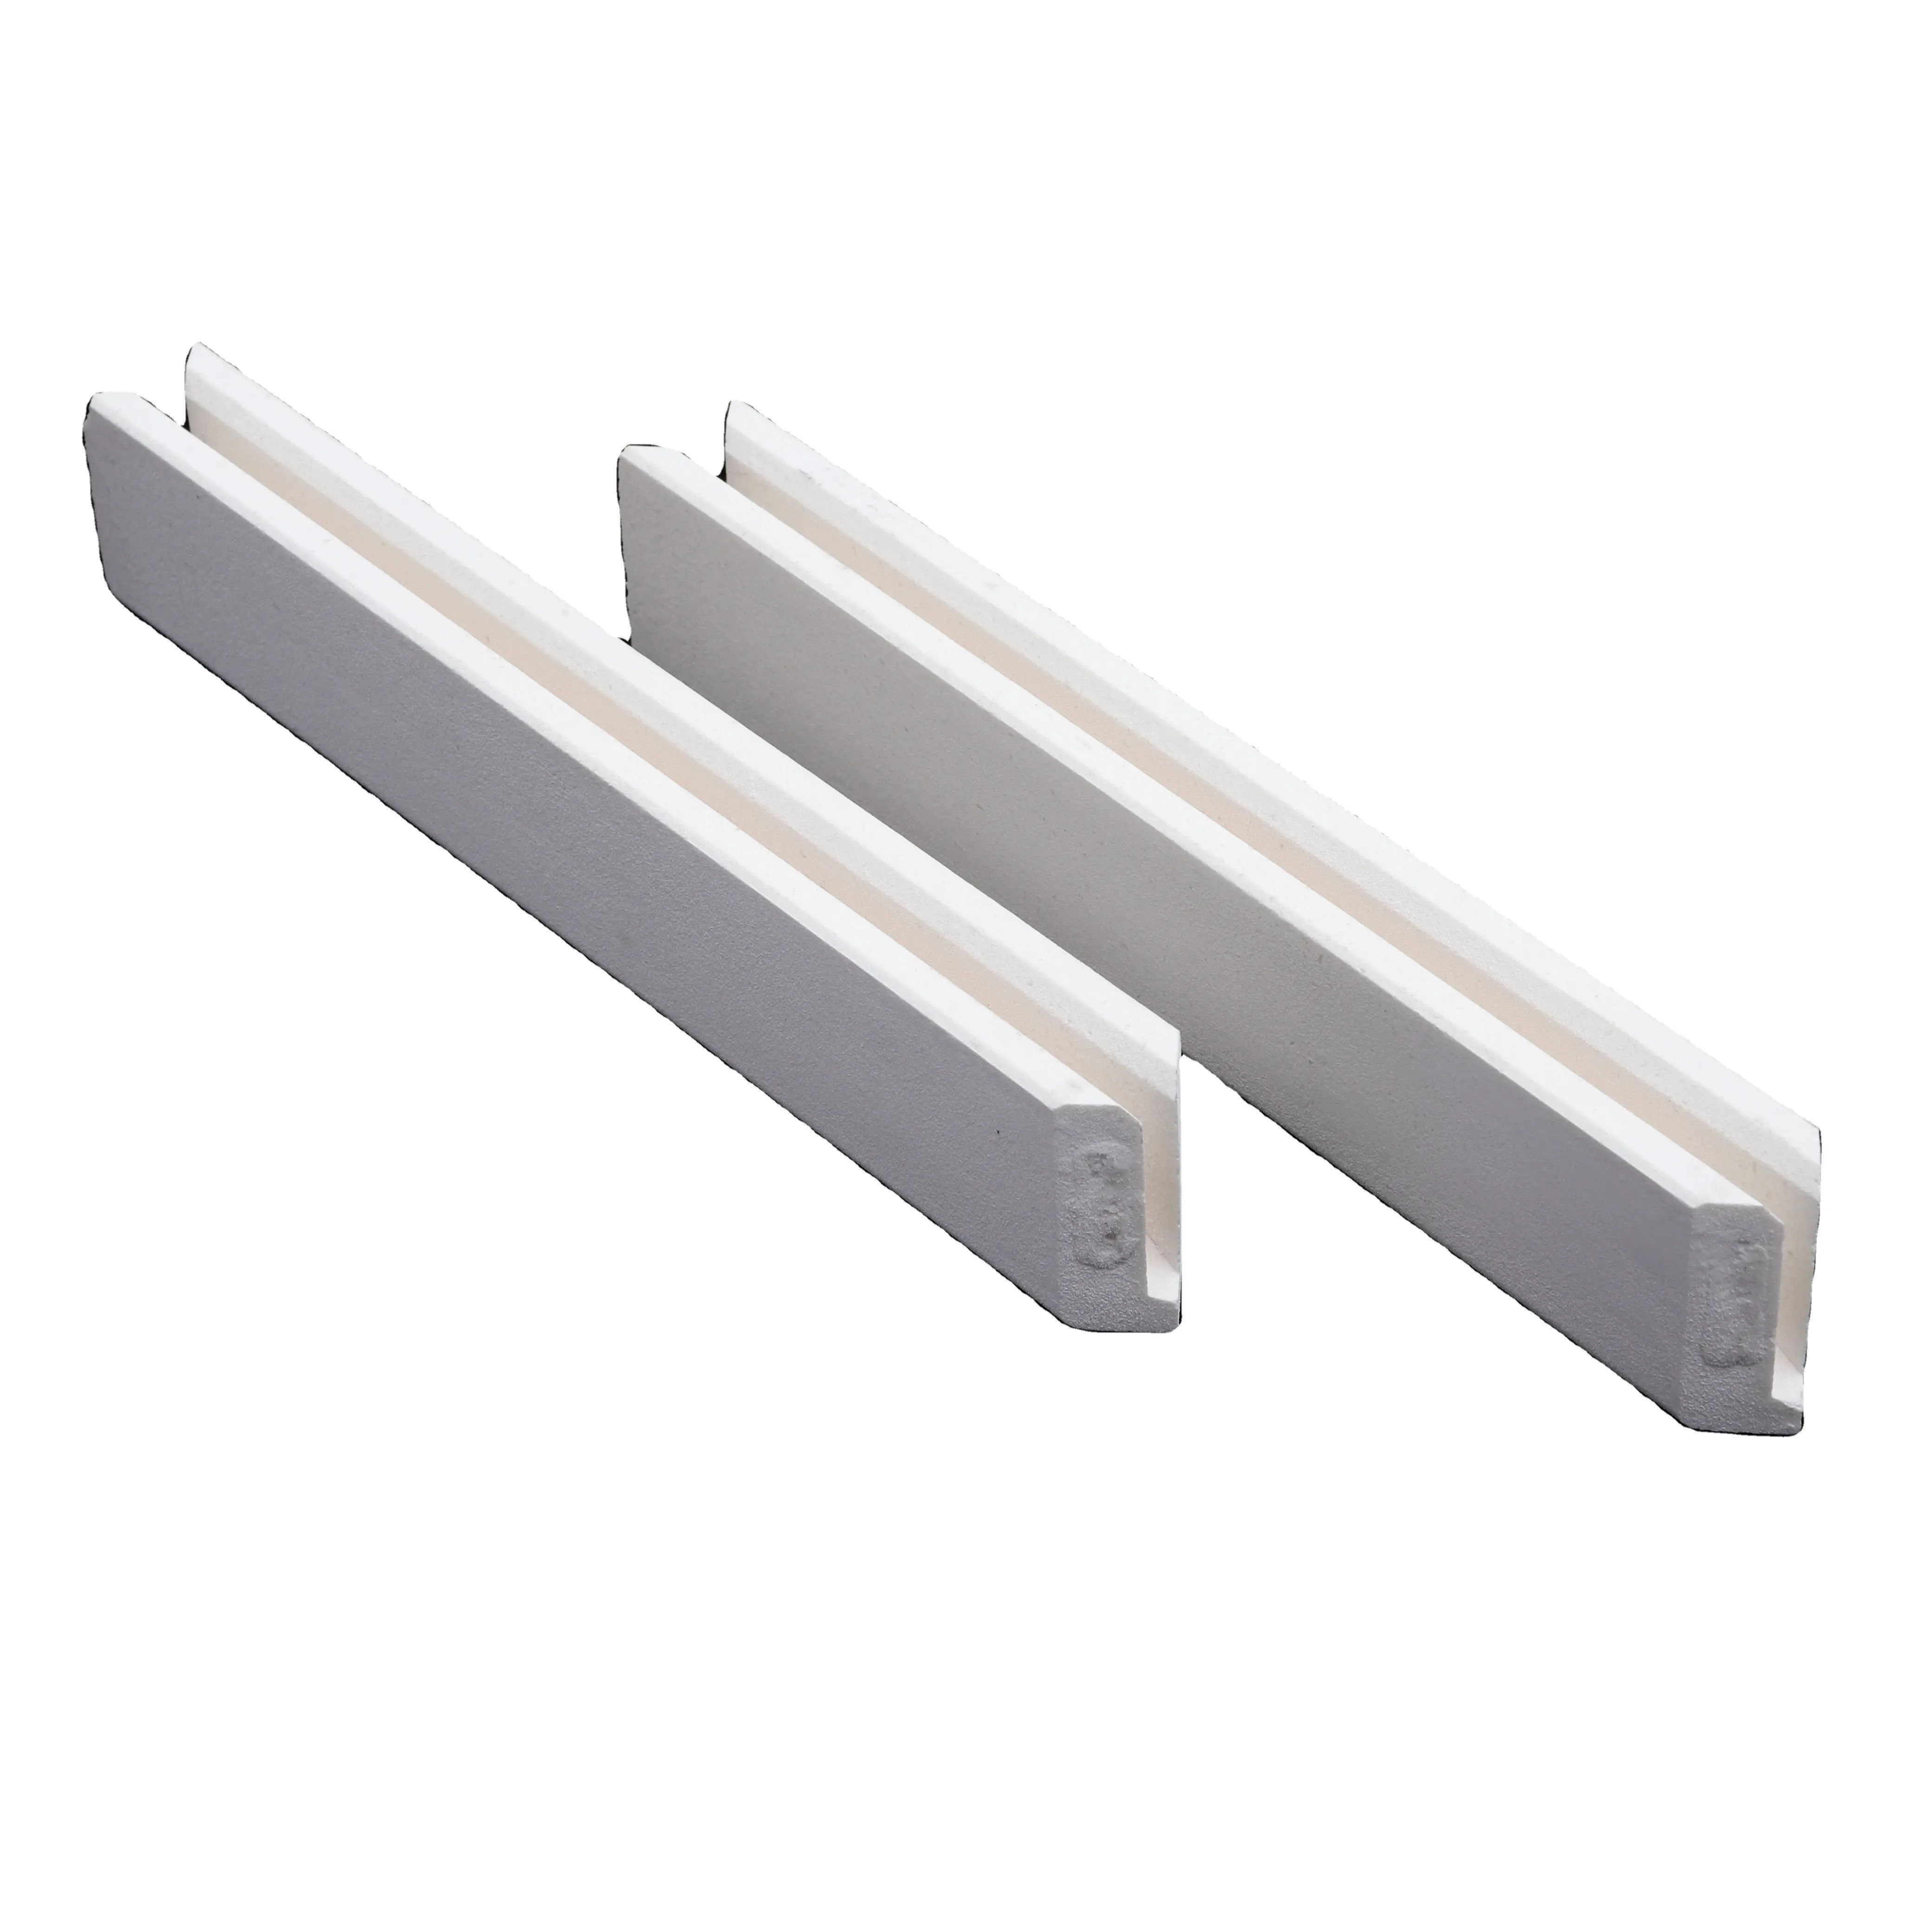 electronic insulated alumina ceramic machinery rail guide Ceramic Guide Parts for Ceramic Rail Orbit Slide Heat Tempering Anneal